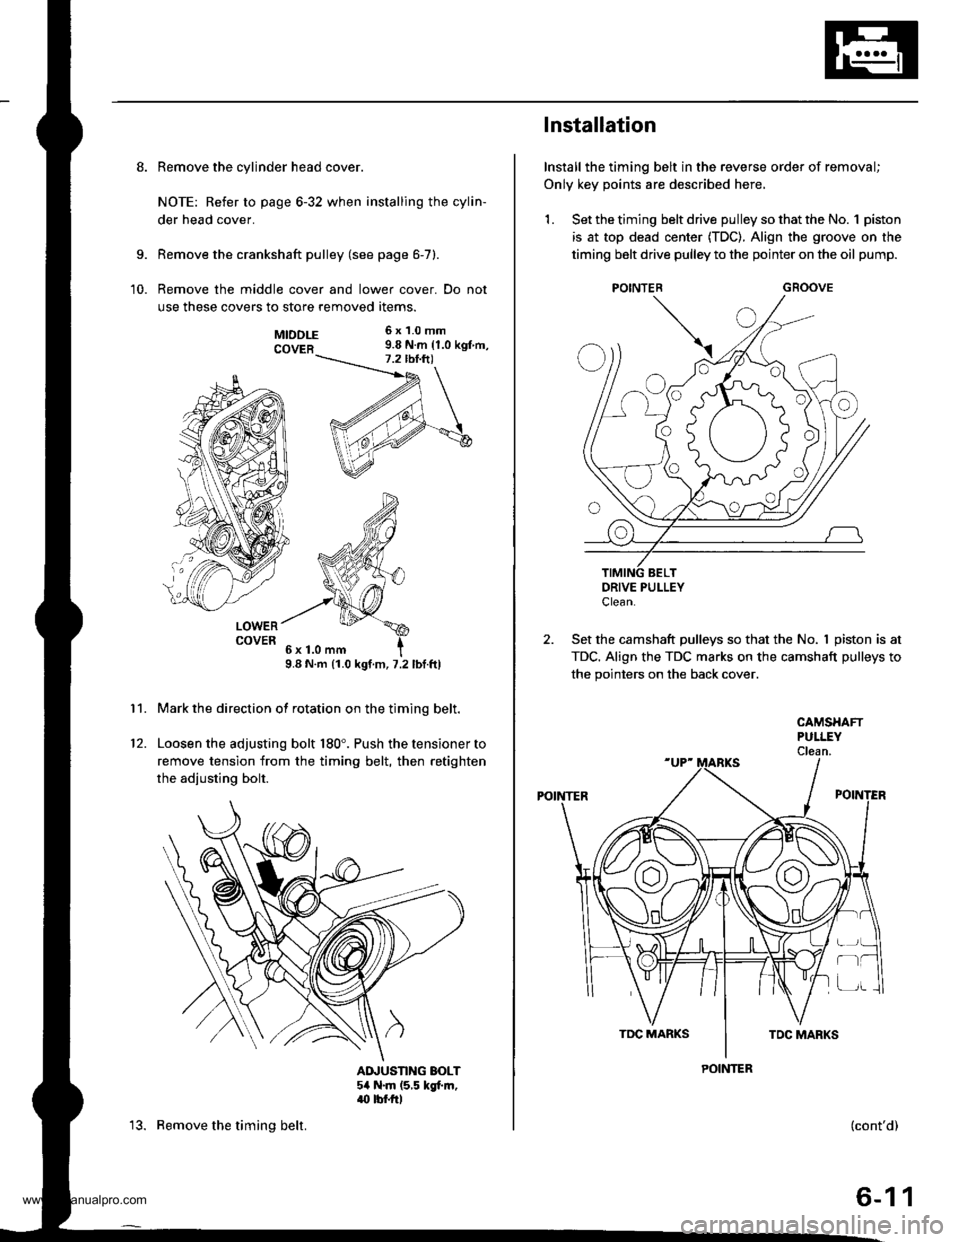 HONDA CR-V 1998 RD1-RD3 / 1.G User Guide 
8. Remove the cylinder head cover.
NOTE: Refer to page 6-32 when installing the cylin-
der head cover.
Remove the crankshaft pulley (see page 6-7).
Remove the middle cover and lower cover. Do not
use